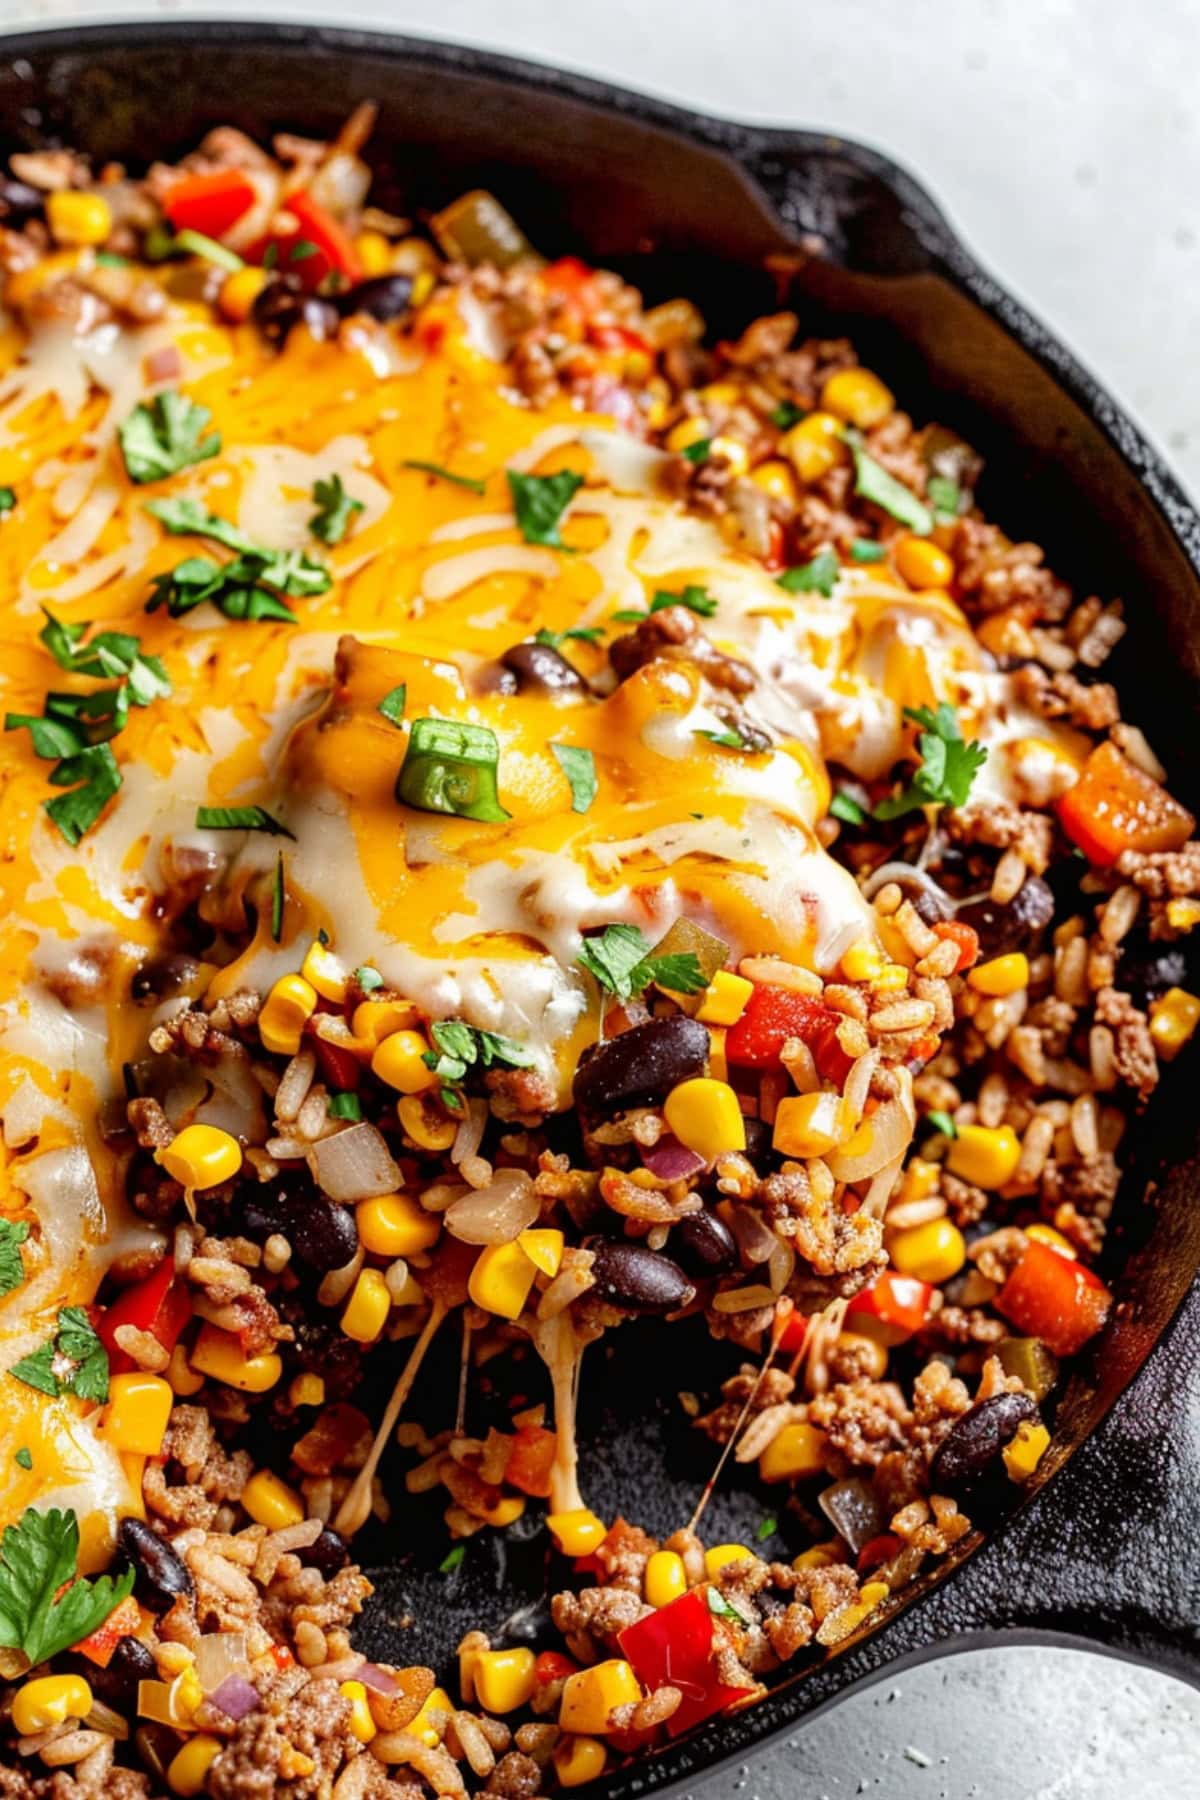 Ground beef with diced red bell pepper, diced red onion, corn kernels, cooked rice, black beans, salsa topped with melted cheese on a cast iron skillet pan on a white marble table.